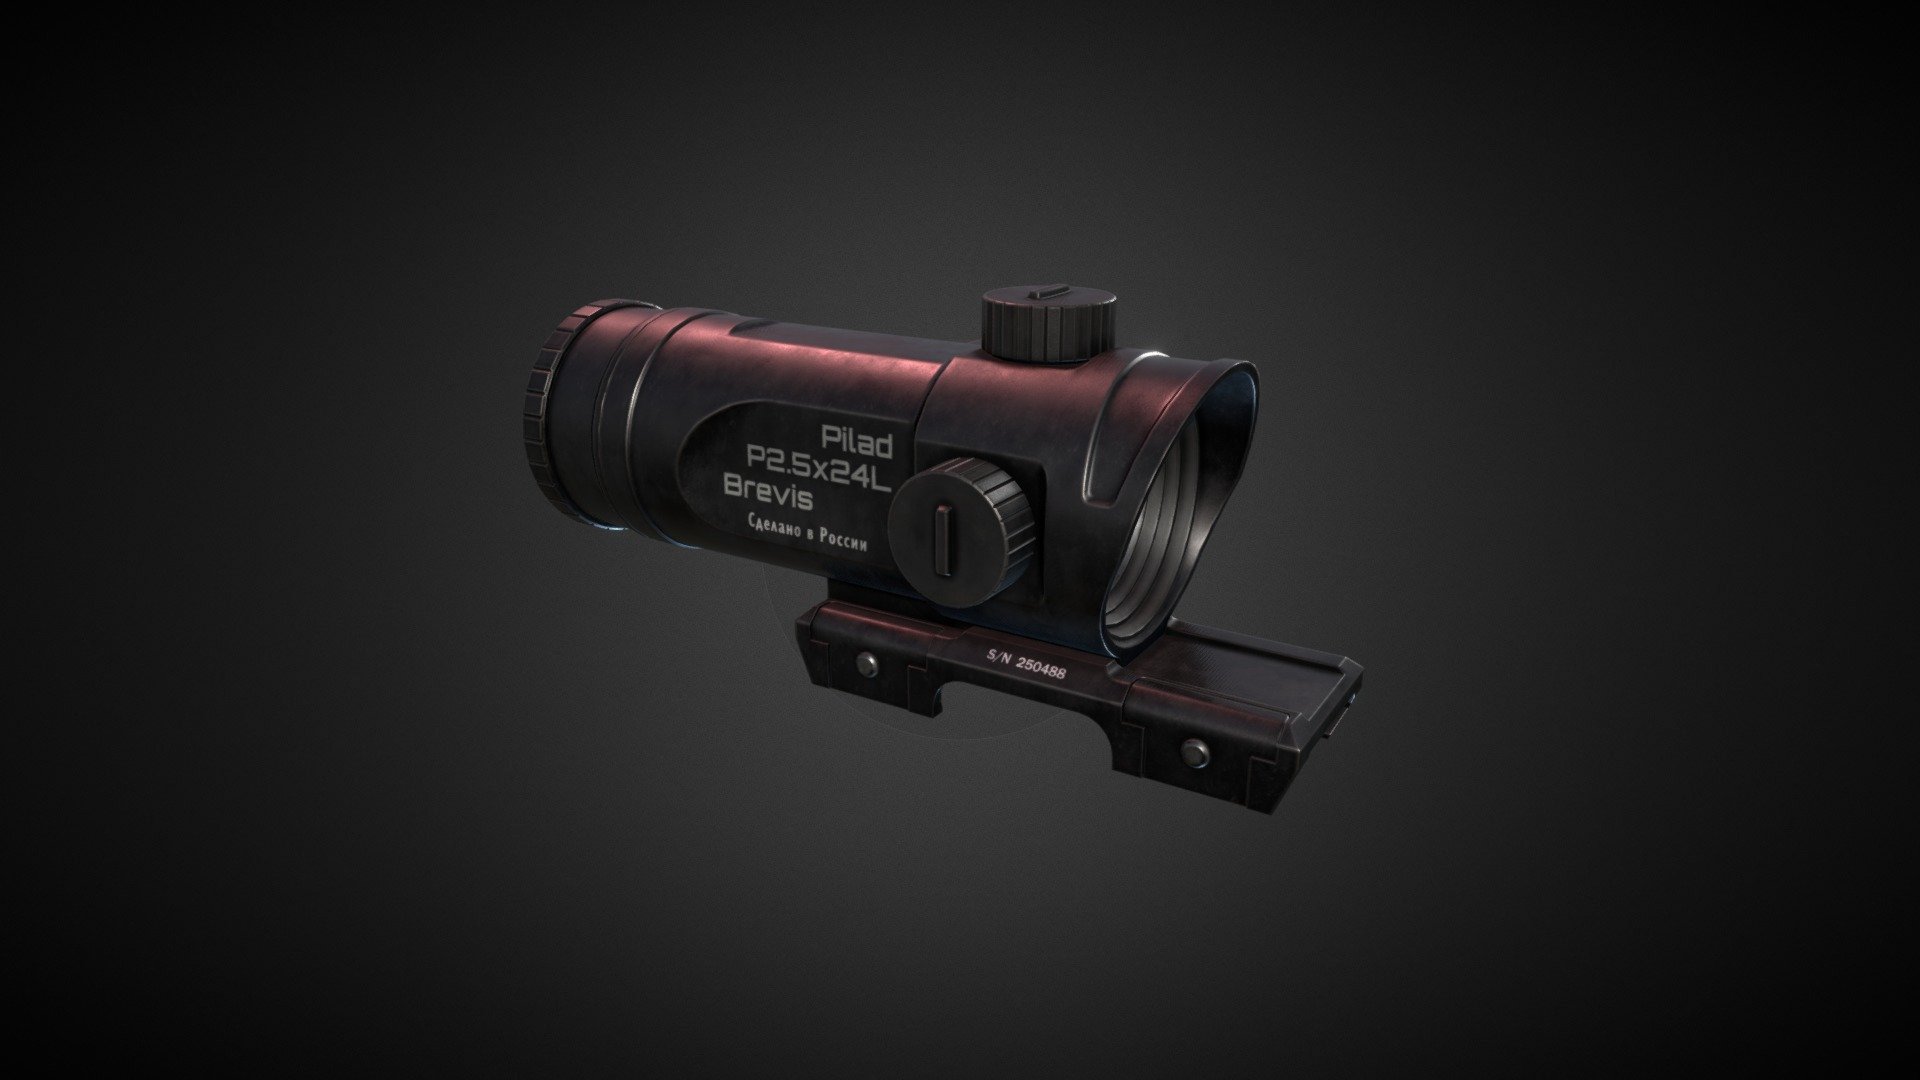 Р2.5Х24 Brevis by VOMZ is lightweight prismatic scope with x2.5 magnification.  

Model have one main PBR Material in 4K plus separate 2k for lense. Black and FDE color available.

Tris: 8K

Verts:4K  

Made in Blender 3d model